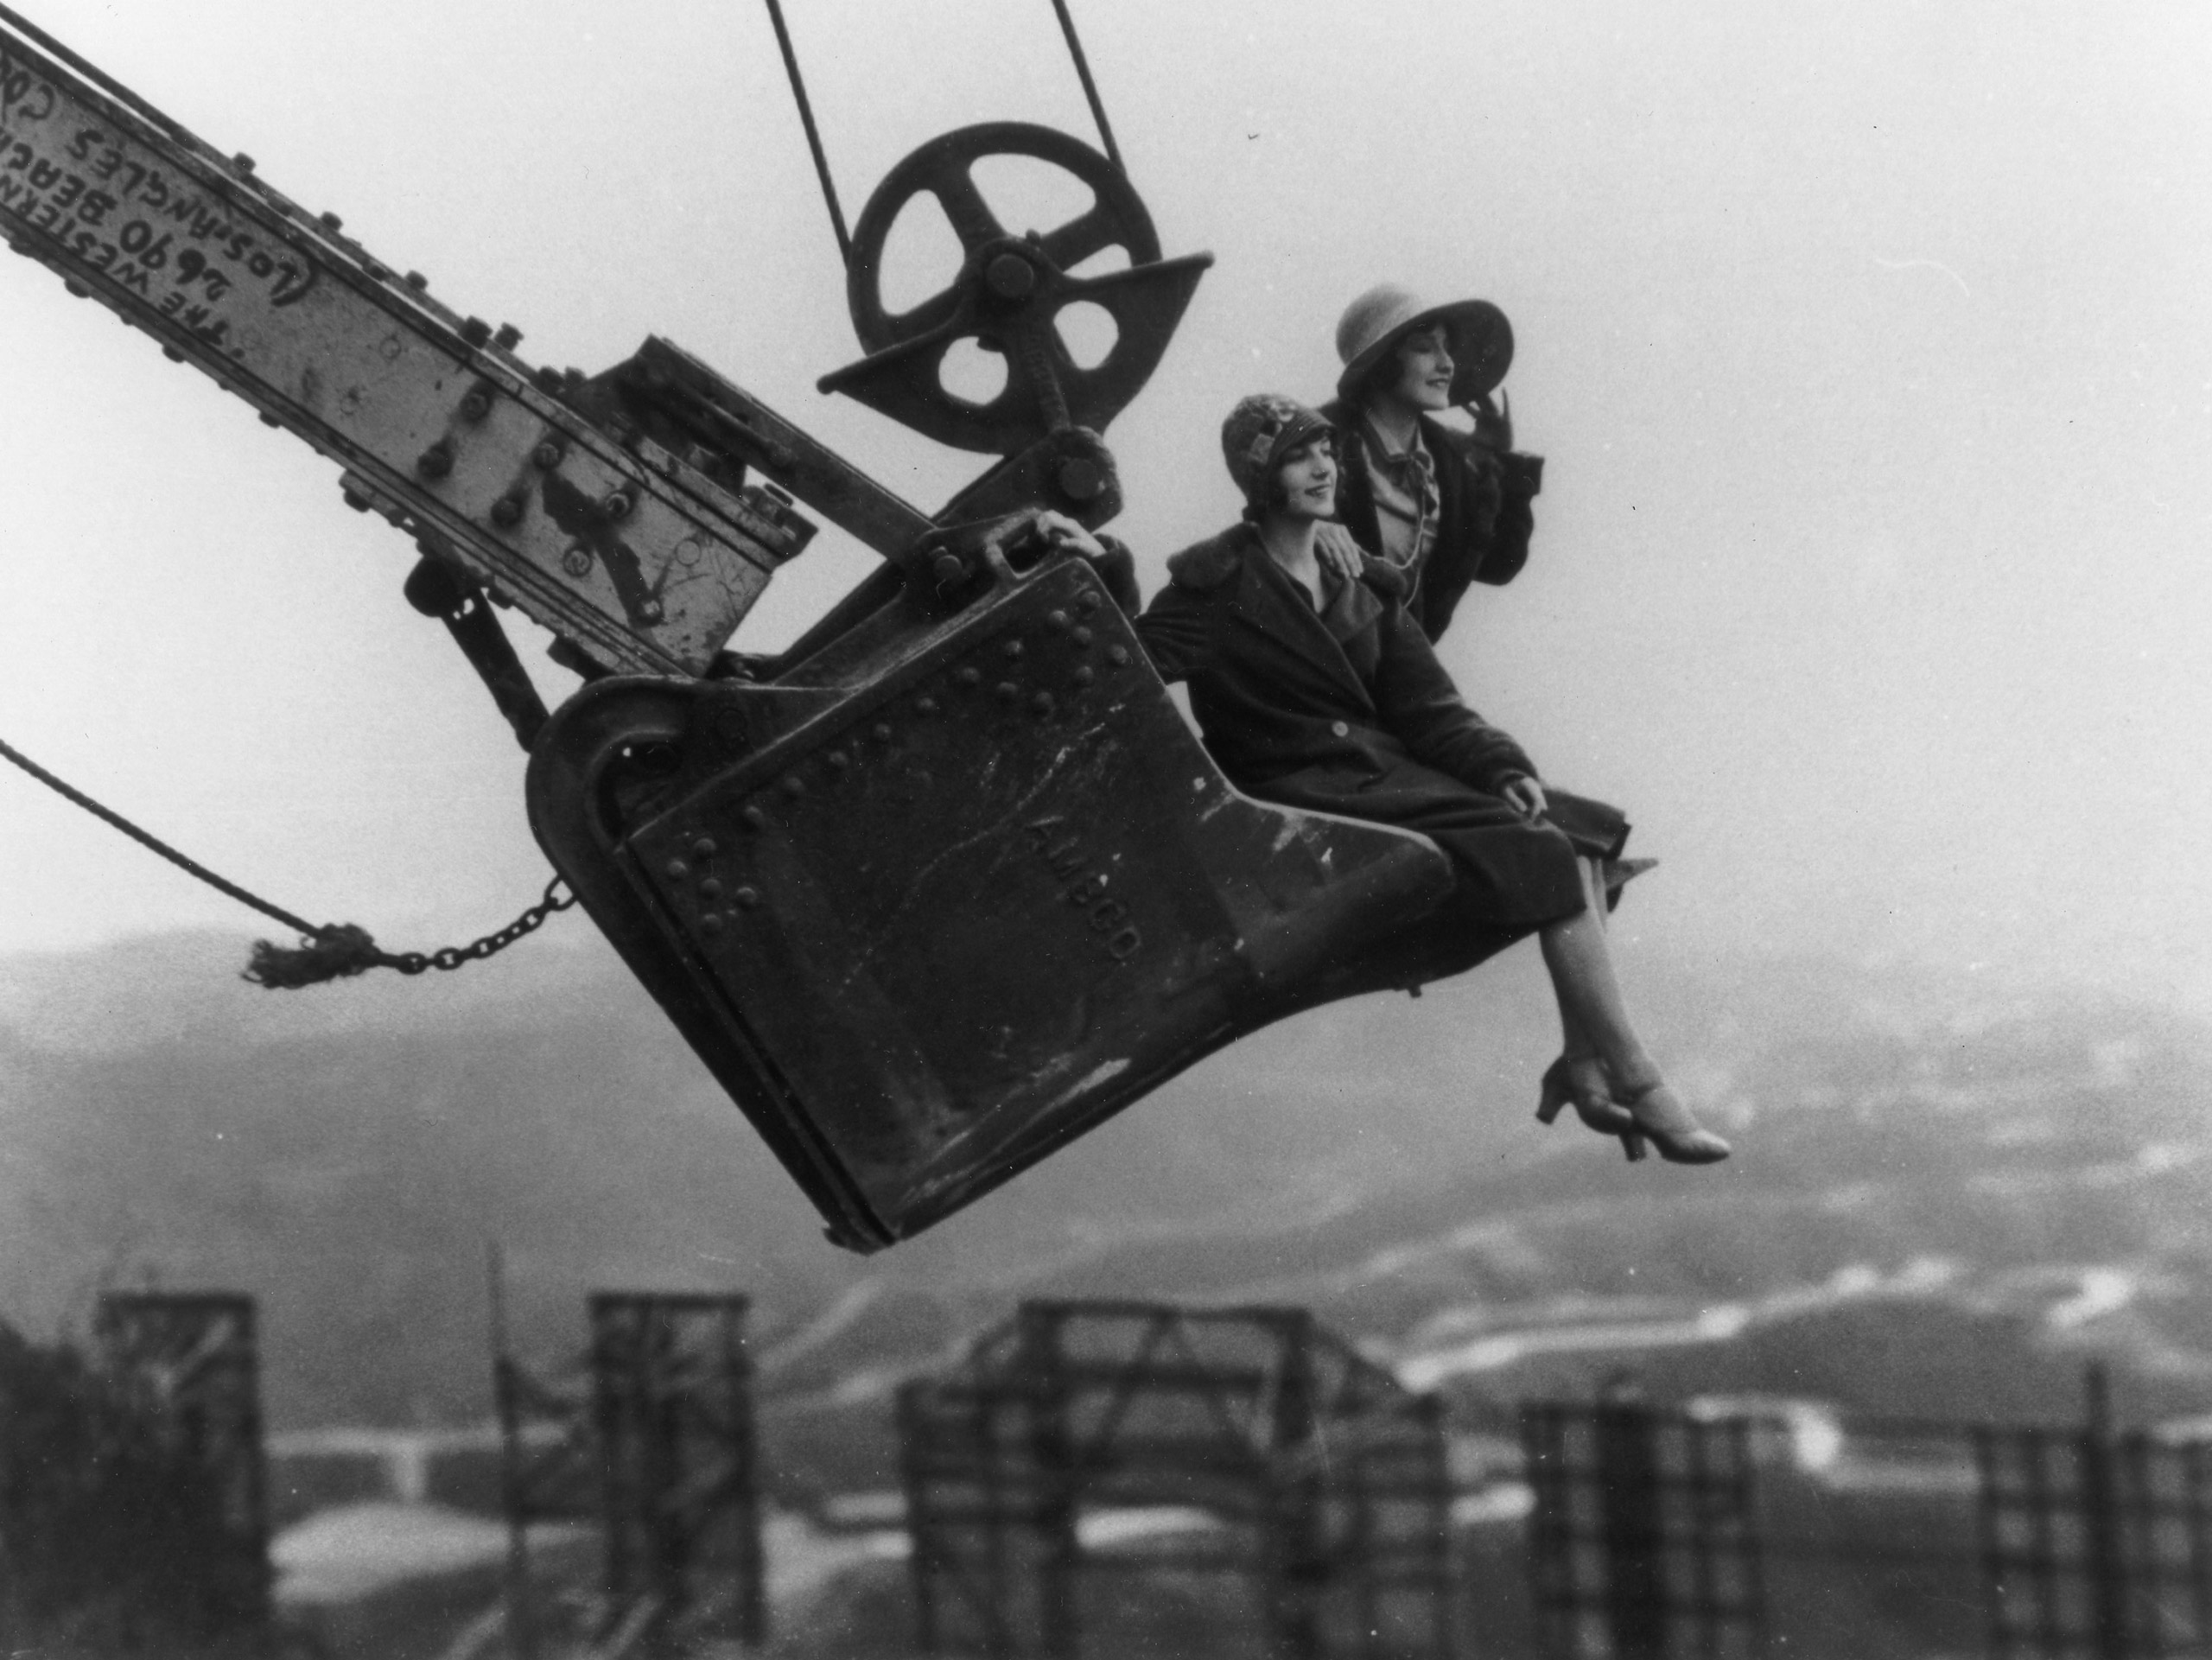 Ladies in a steam shovel bucket, behind the Hollywoodland sign, 1923.